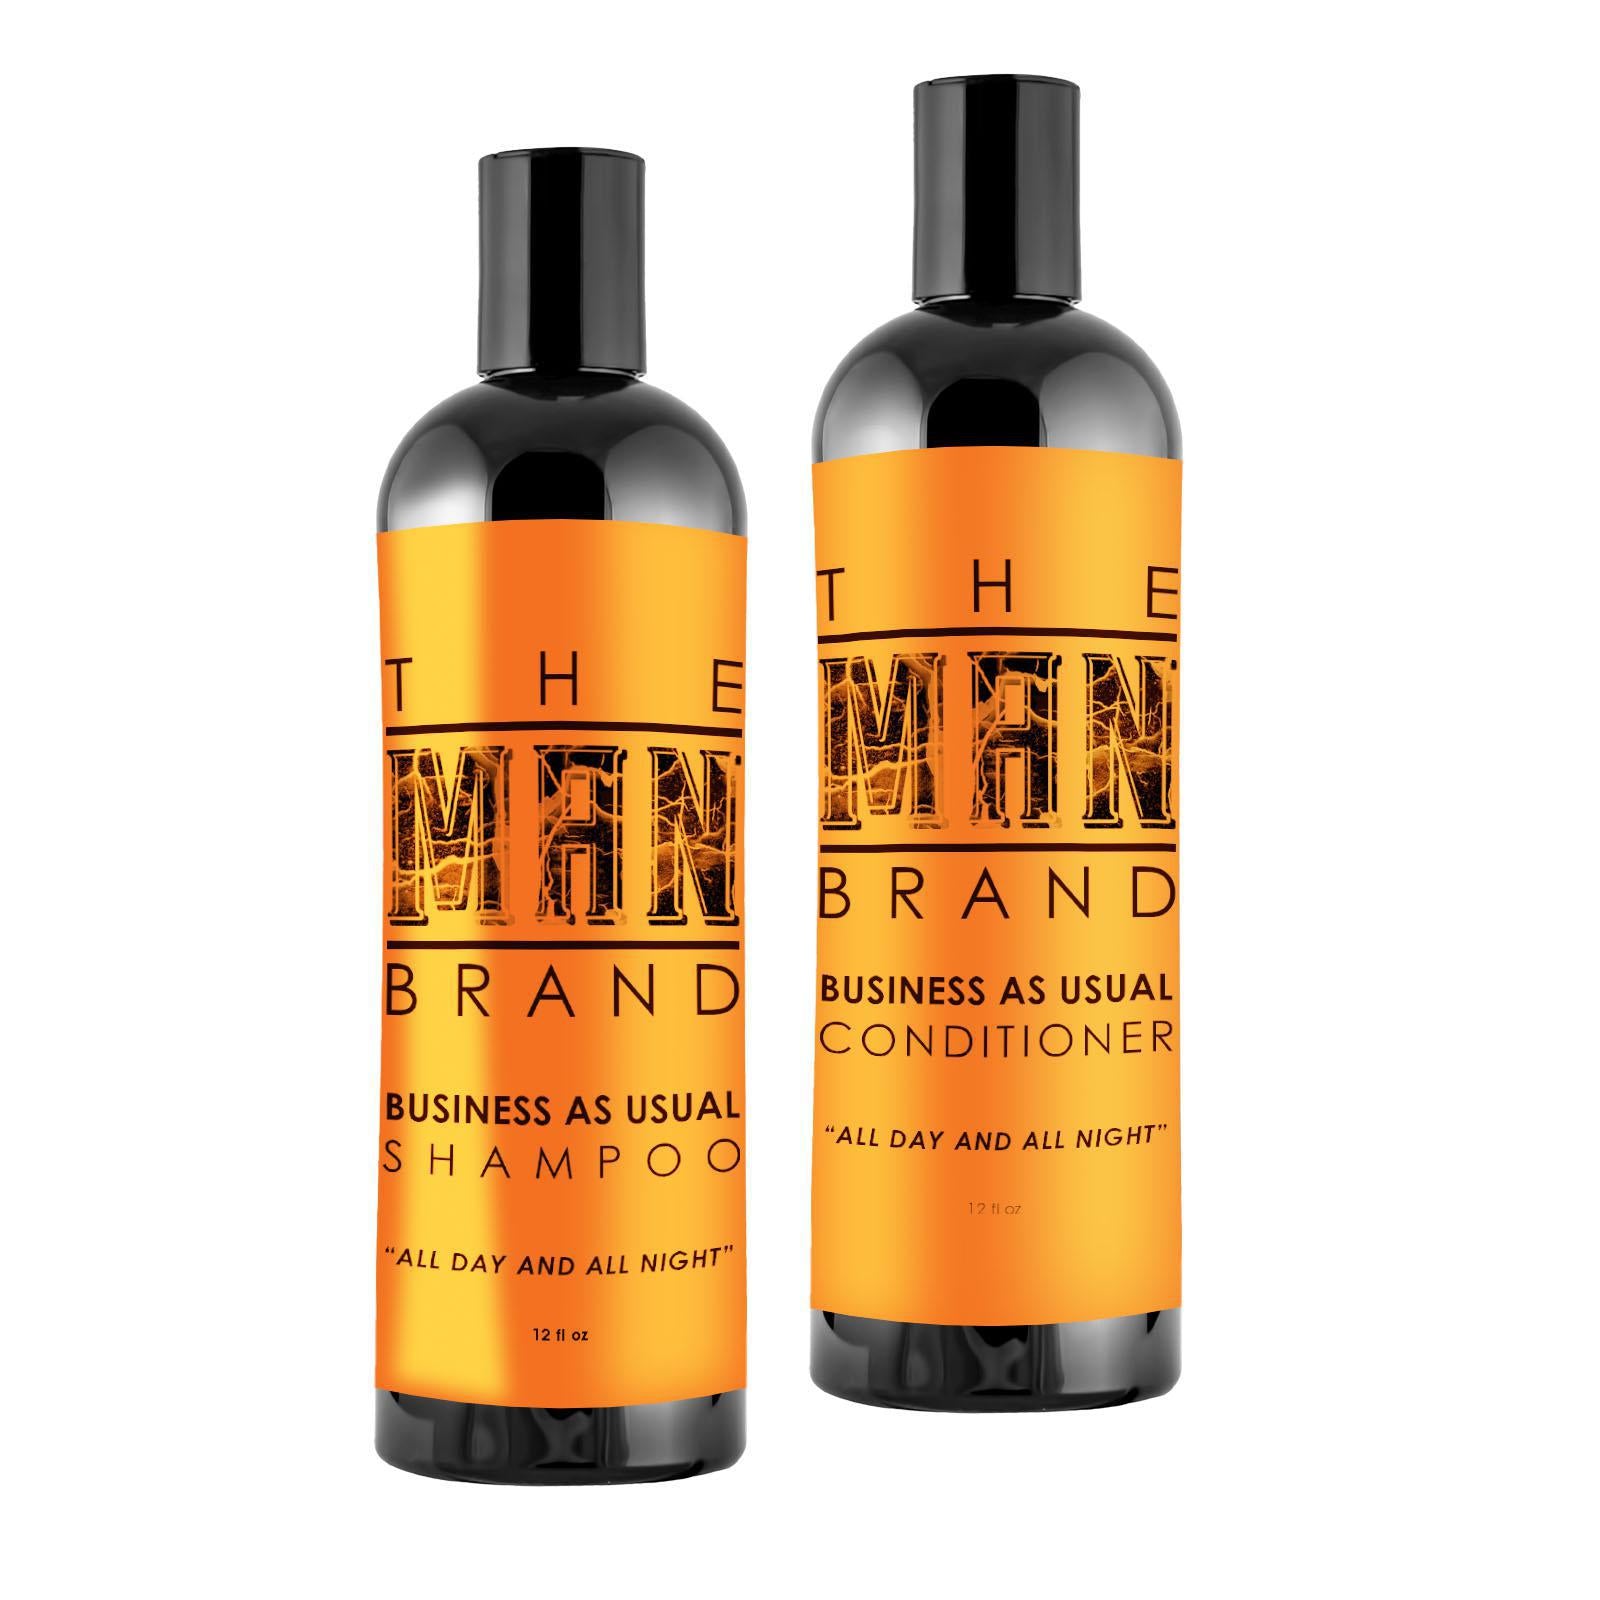 Hair Pack Men's Grooming Kit: Shampoo and Conditioner